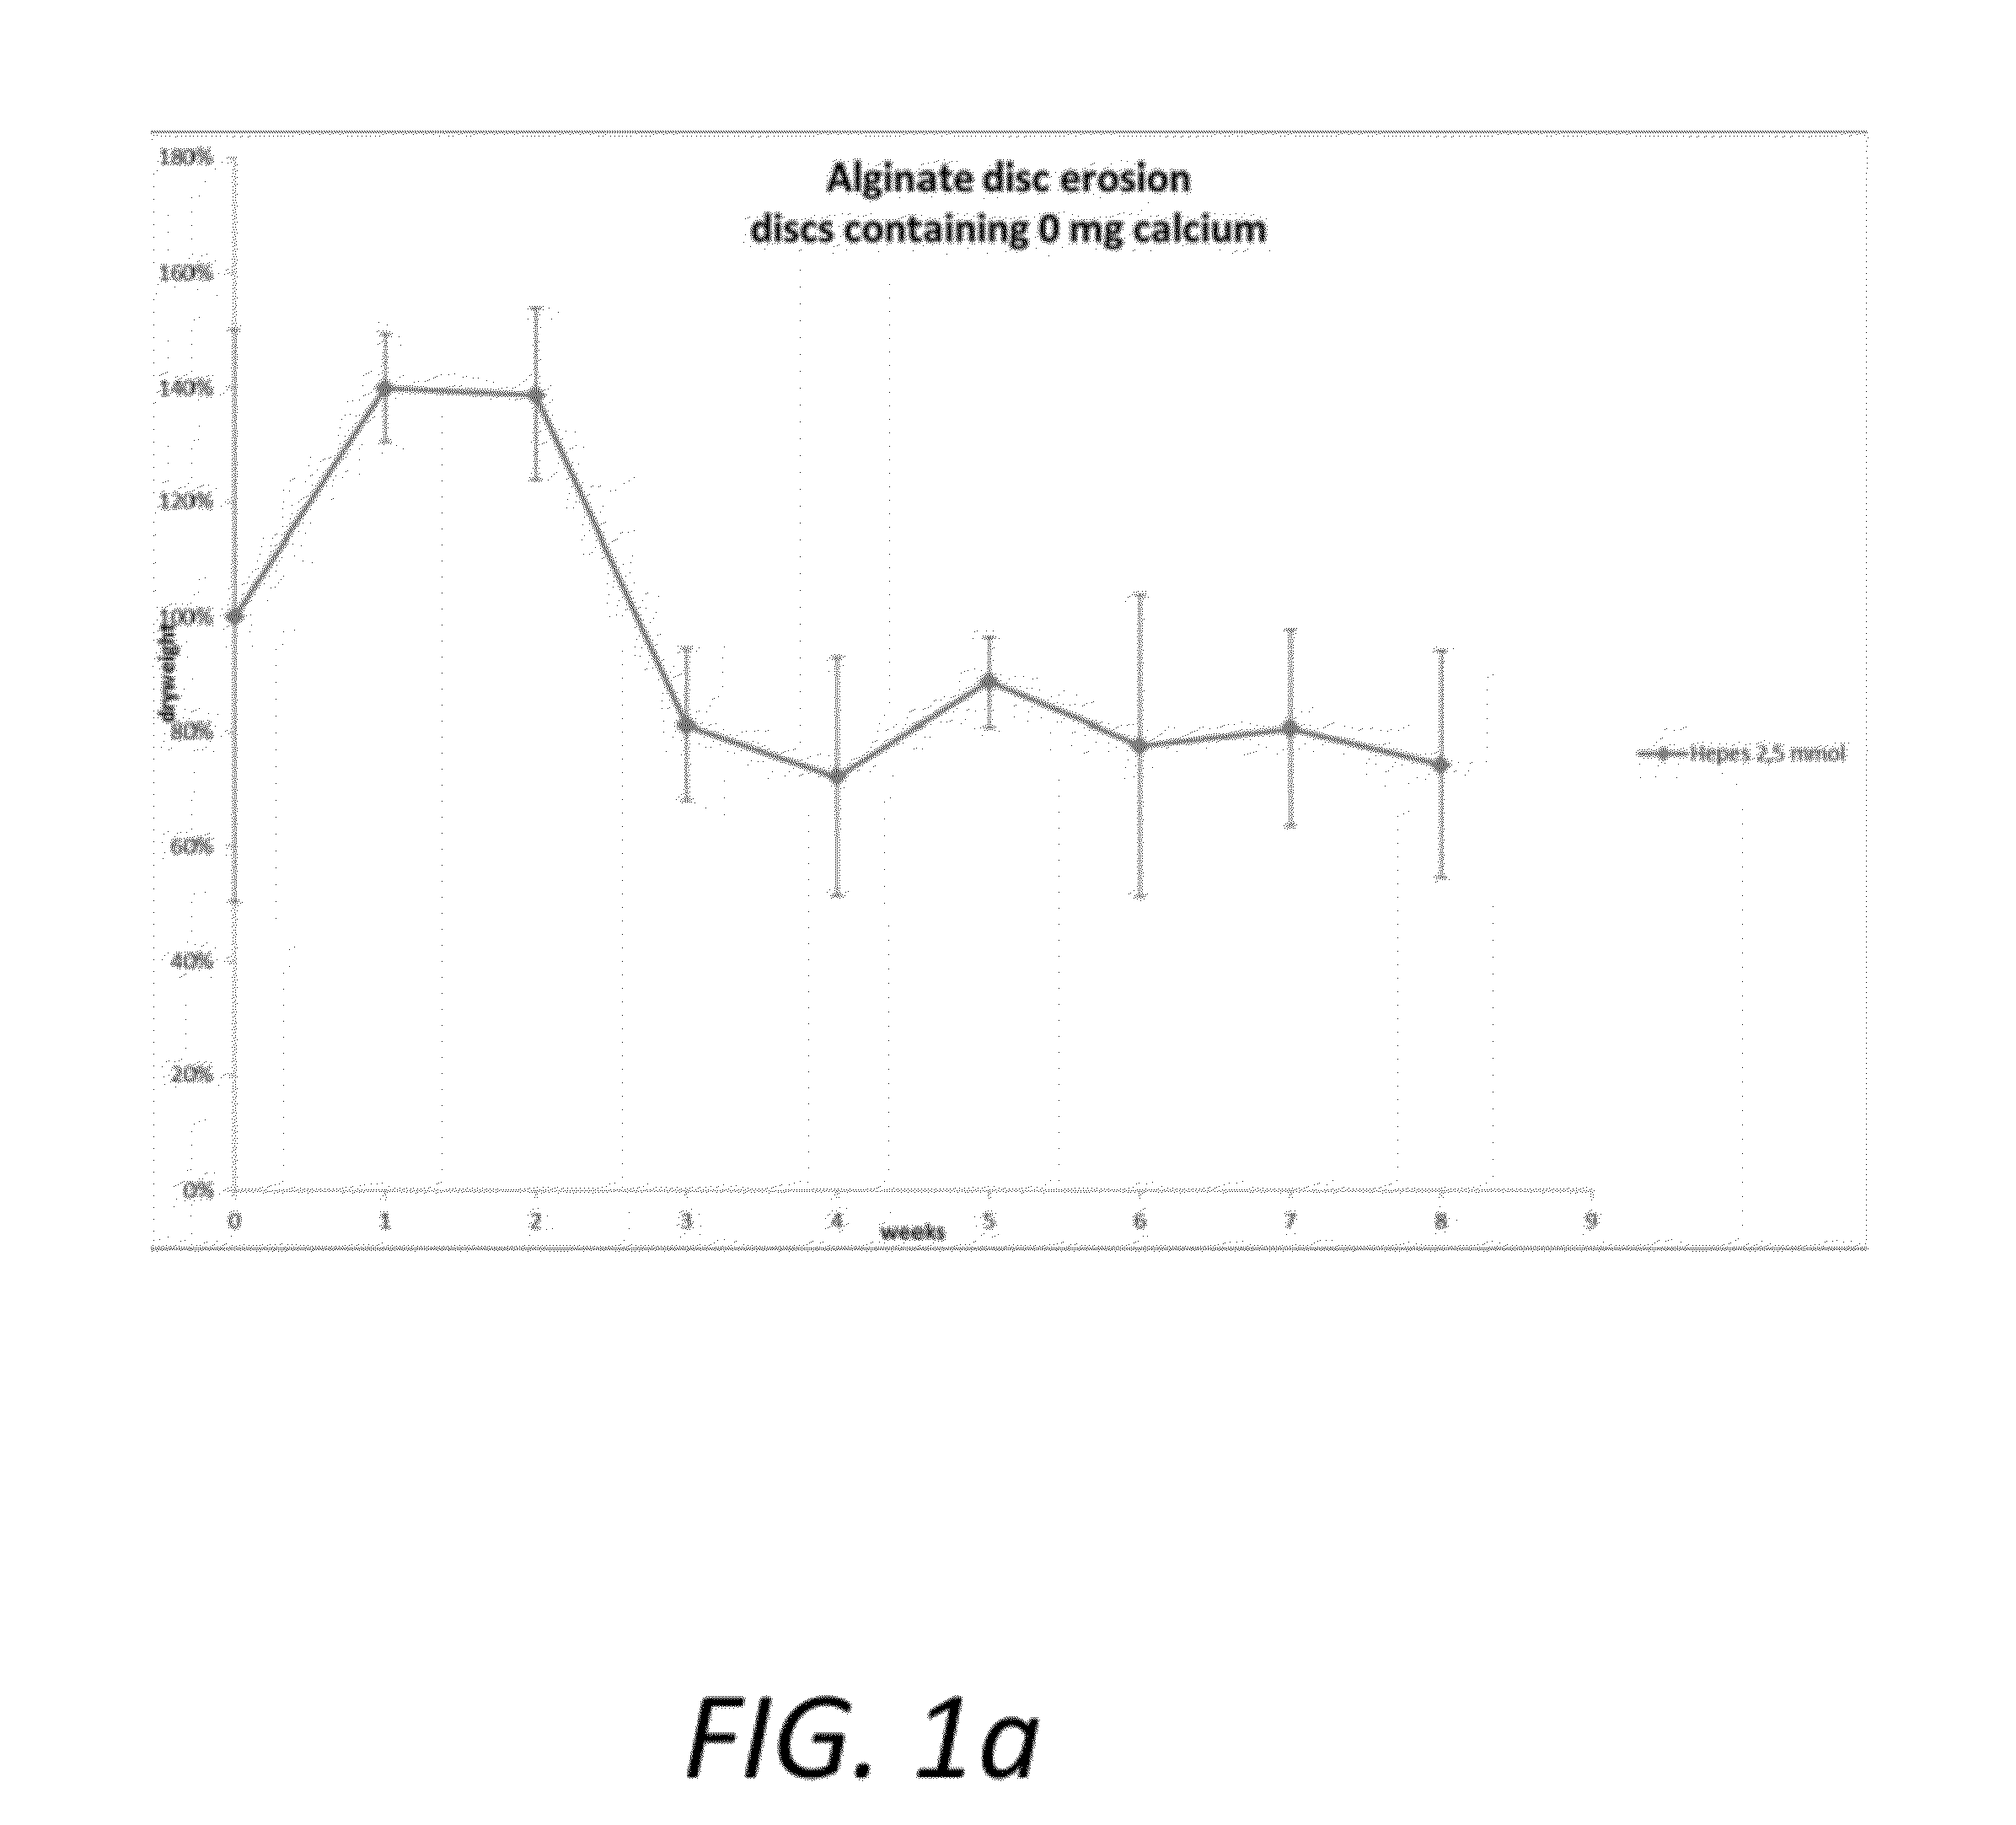 Anti-Adhesion Alginate Barrier of Variable Absorbance